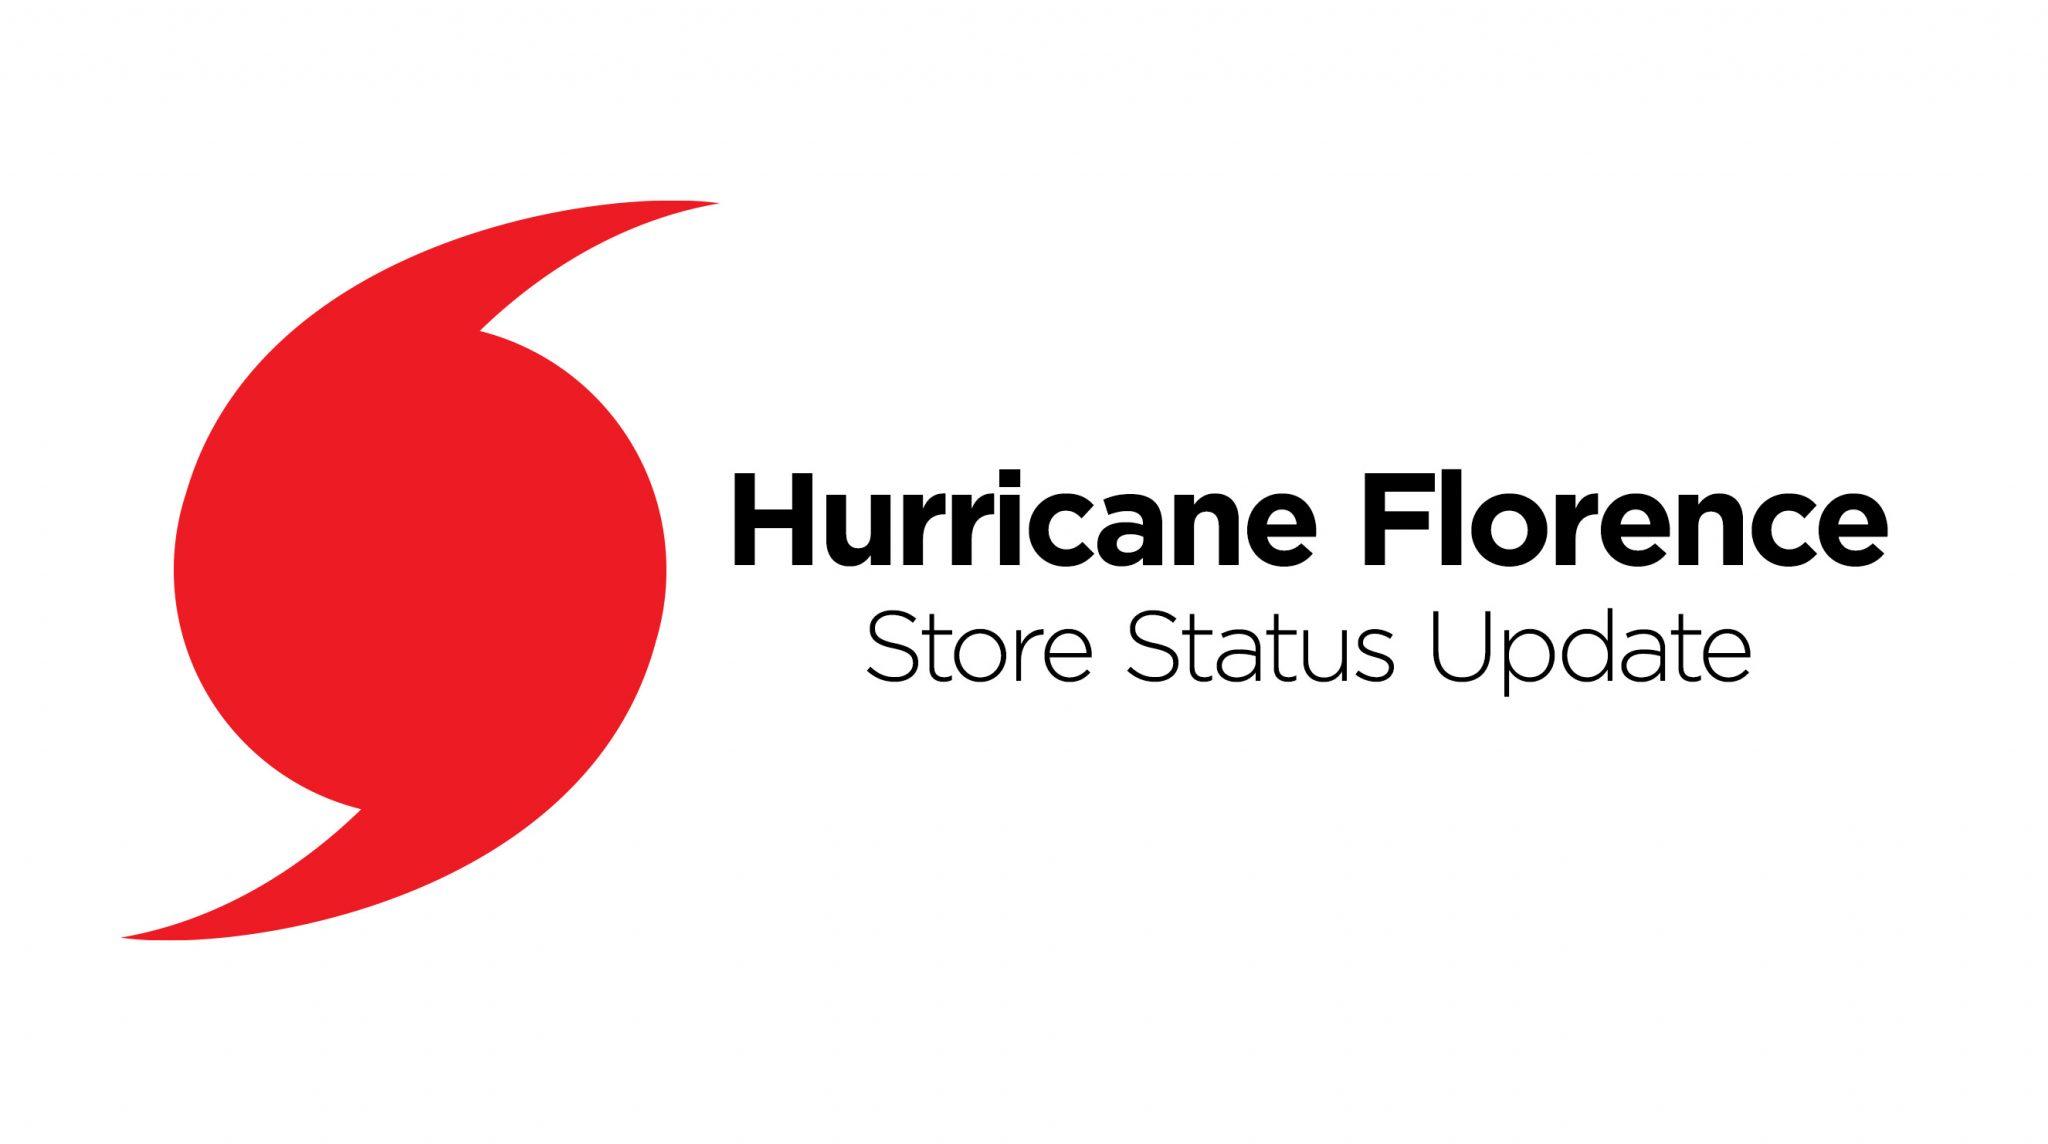 JCPenney 2018 Logo - JCPenney Provides Update on Hurricane Florence – JCPenney Company Blog